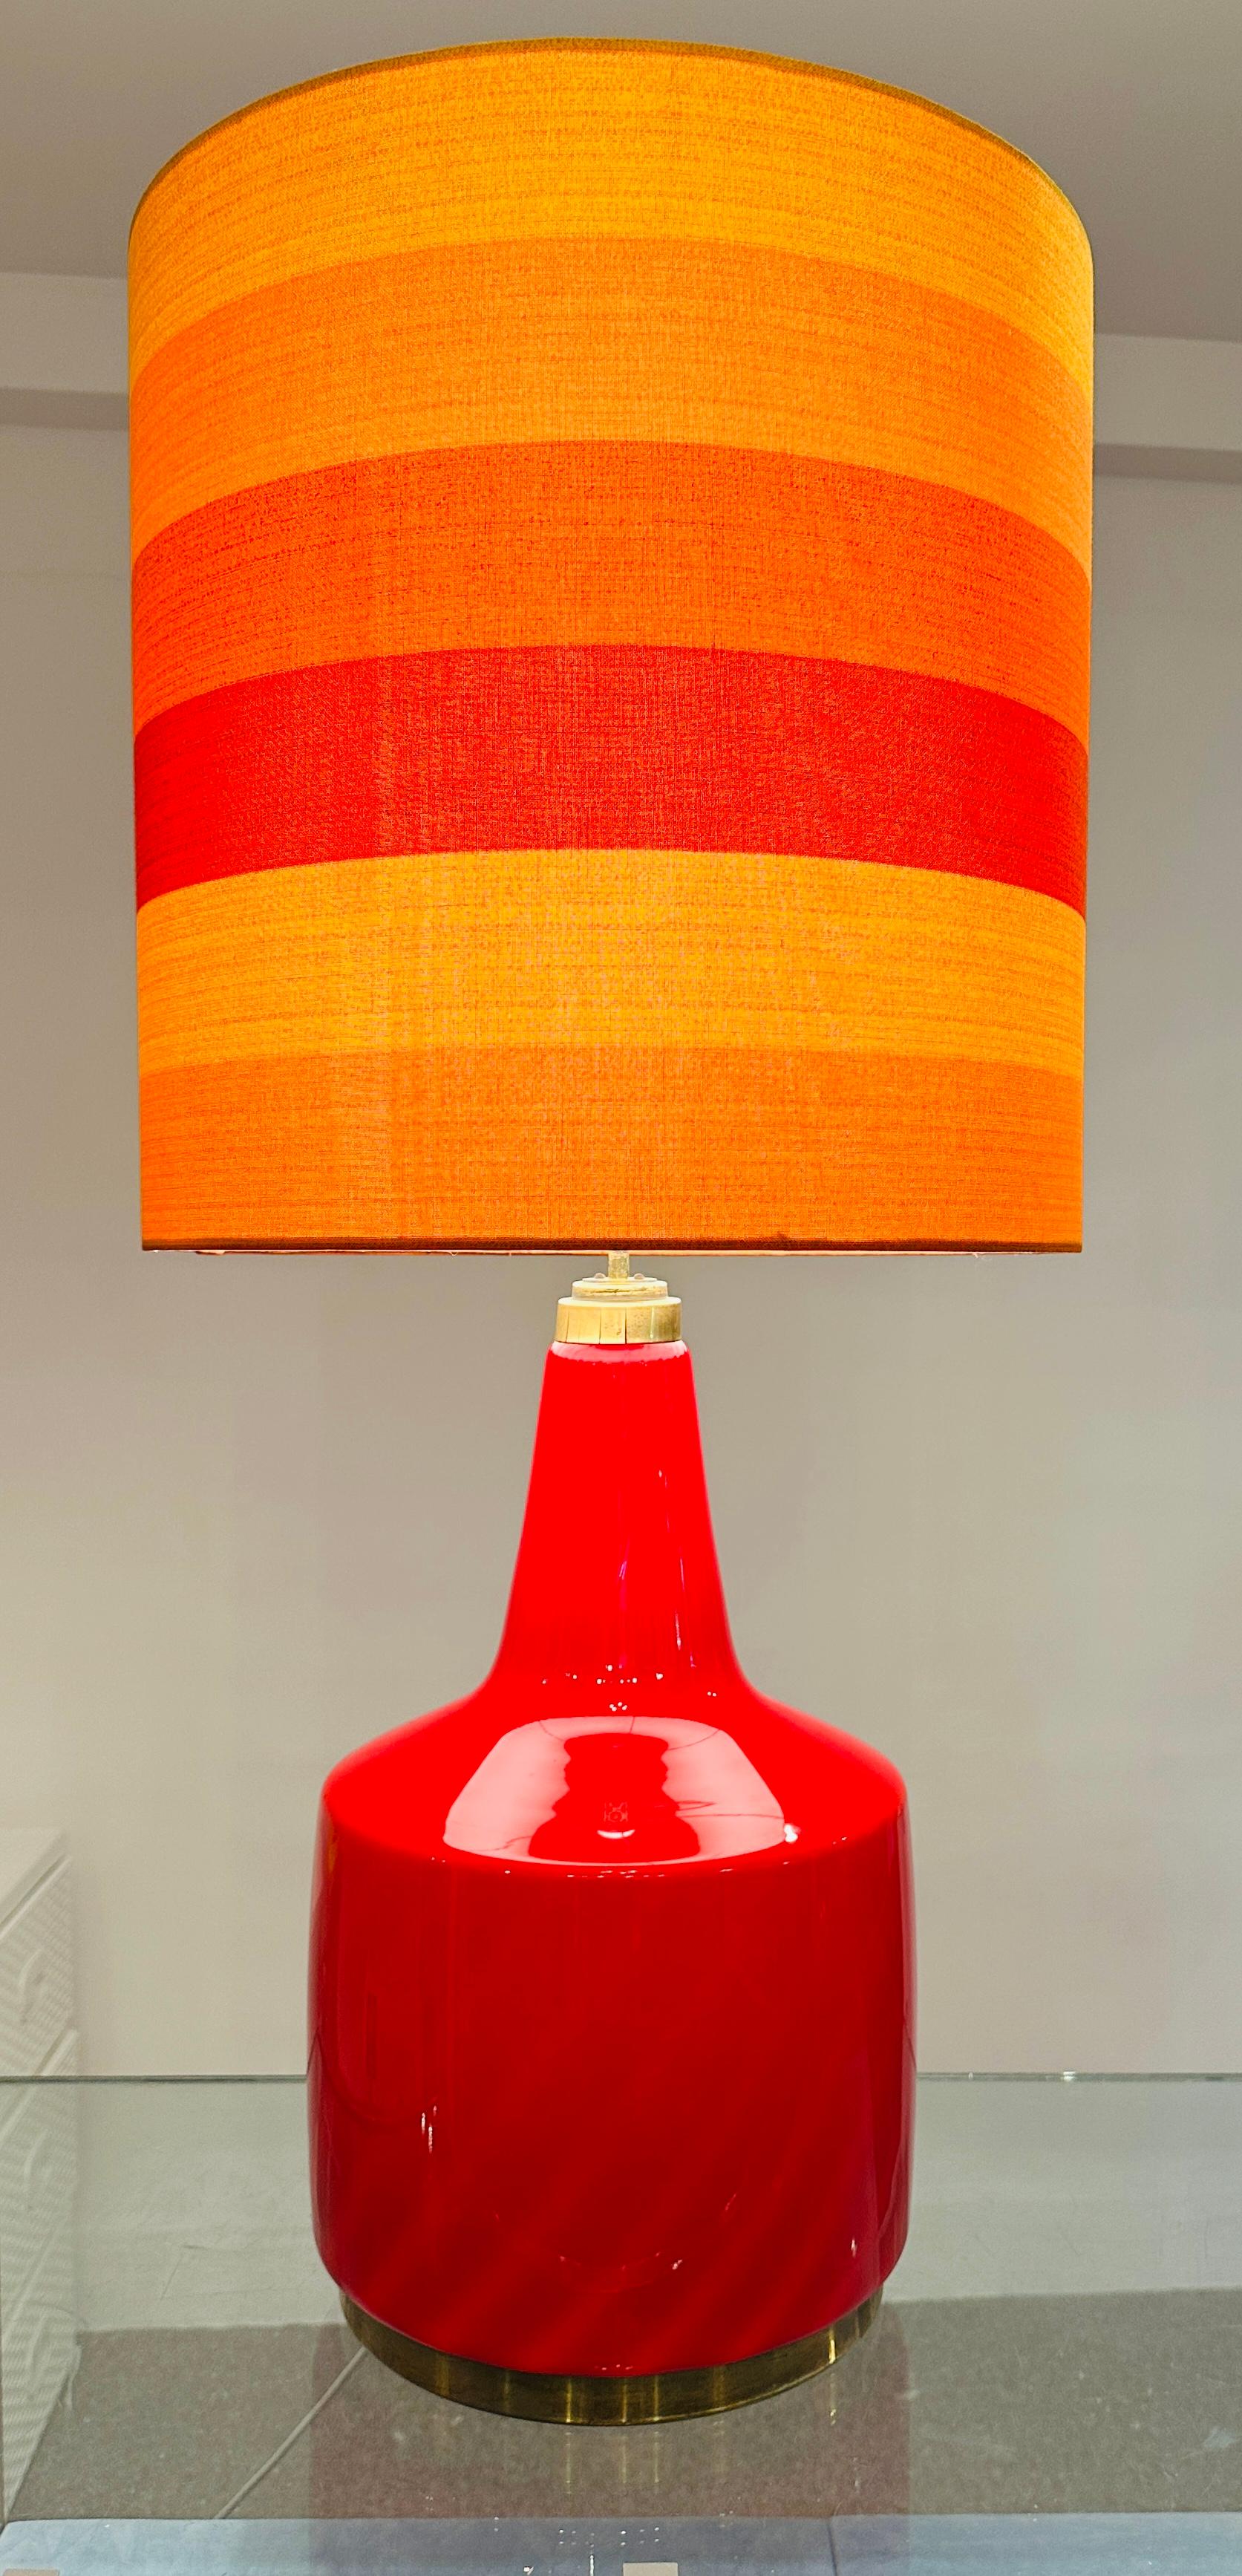 Large and heavy 1970s German Doria Leuchten table lamp well-made and constructed of double-layered glass with a brass ring base and matching bulb socket holder.  The burgundy red coloured base with a contrasting lighter coloured swirled interior is